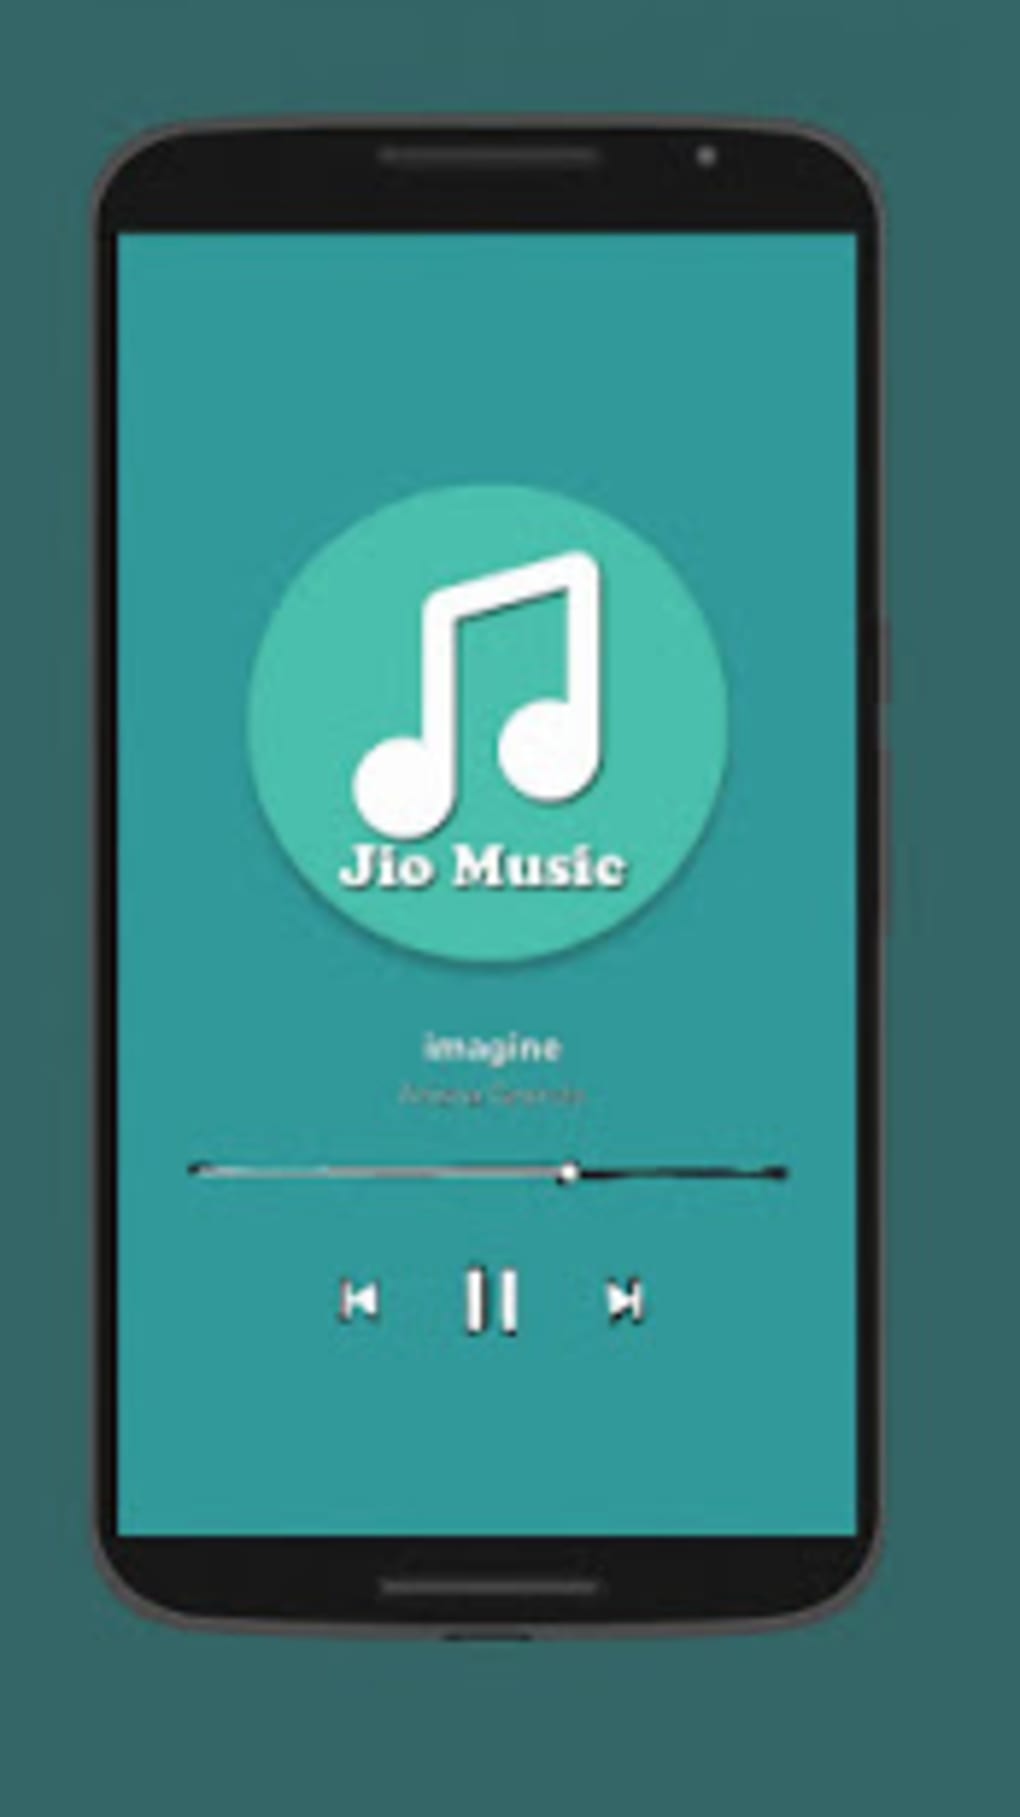 Iphone ringtone download for jio phone number